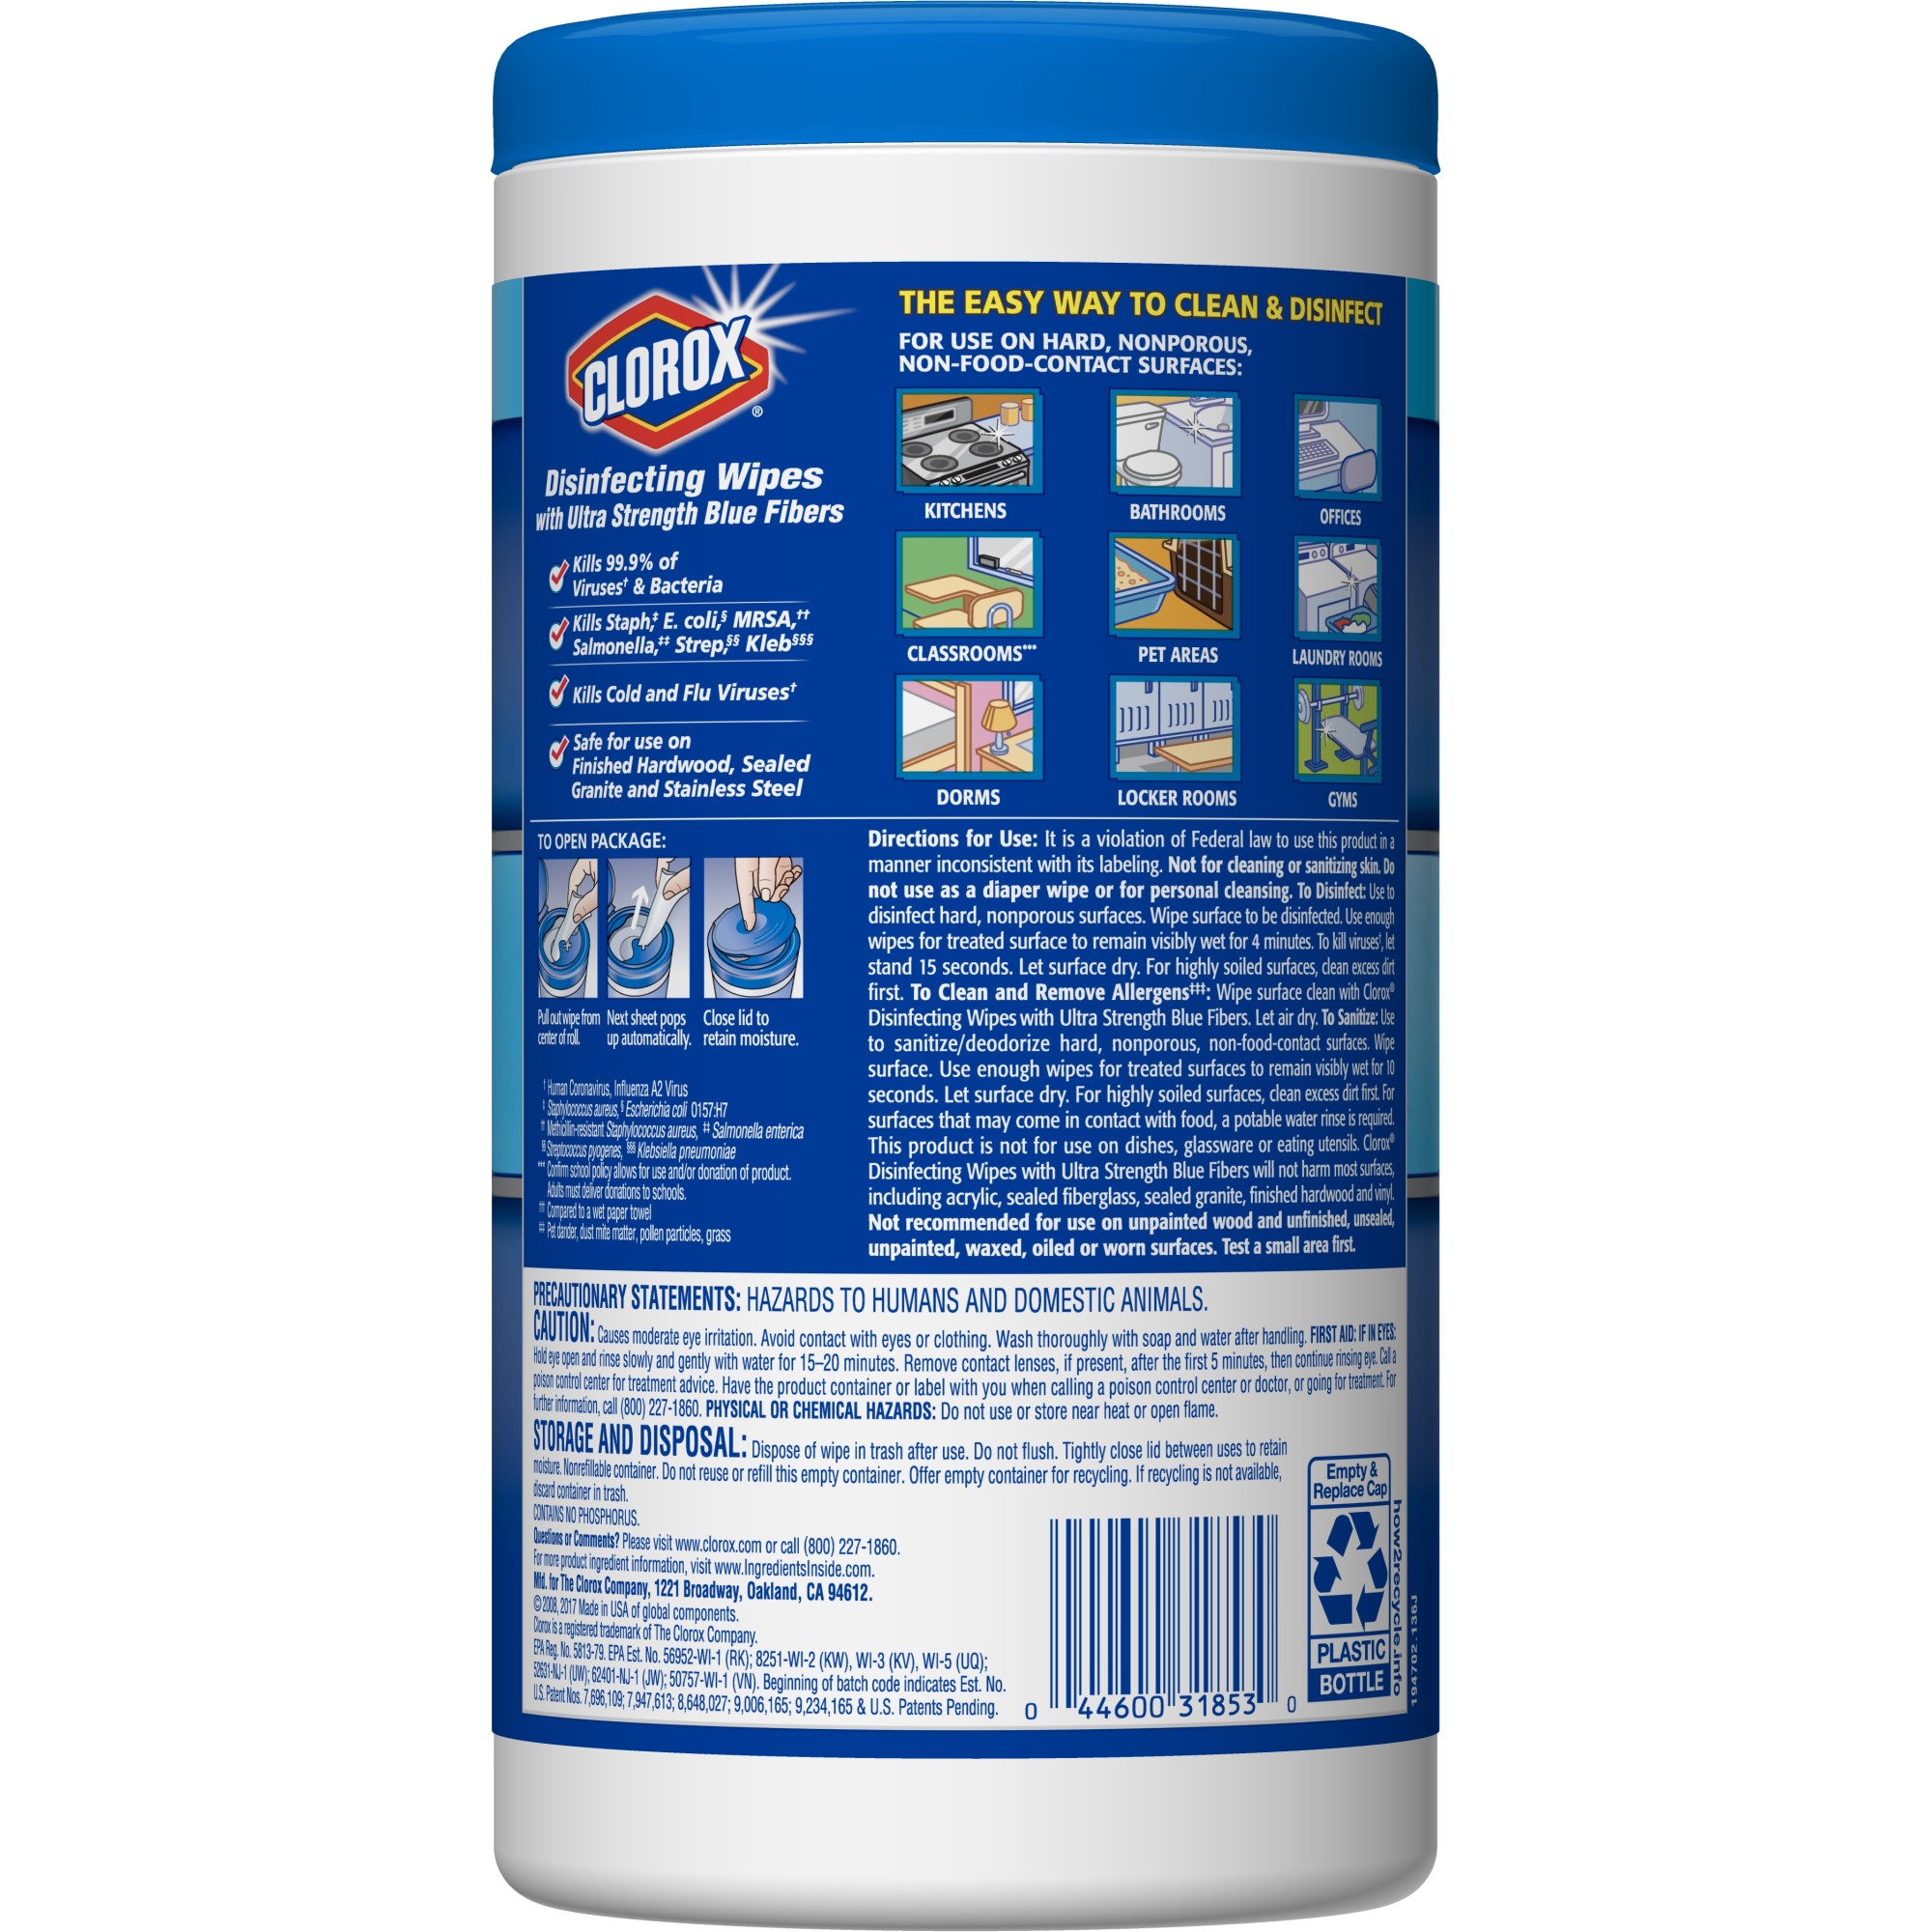 Clorox Disinfecting Wipes with Ultra Strength Blue Fibers, Crisp Lemon - 1 Canister - 65 Wipes - image 5 of 7